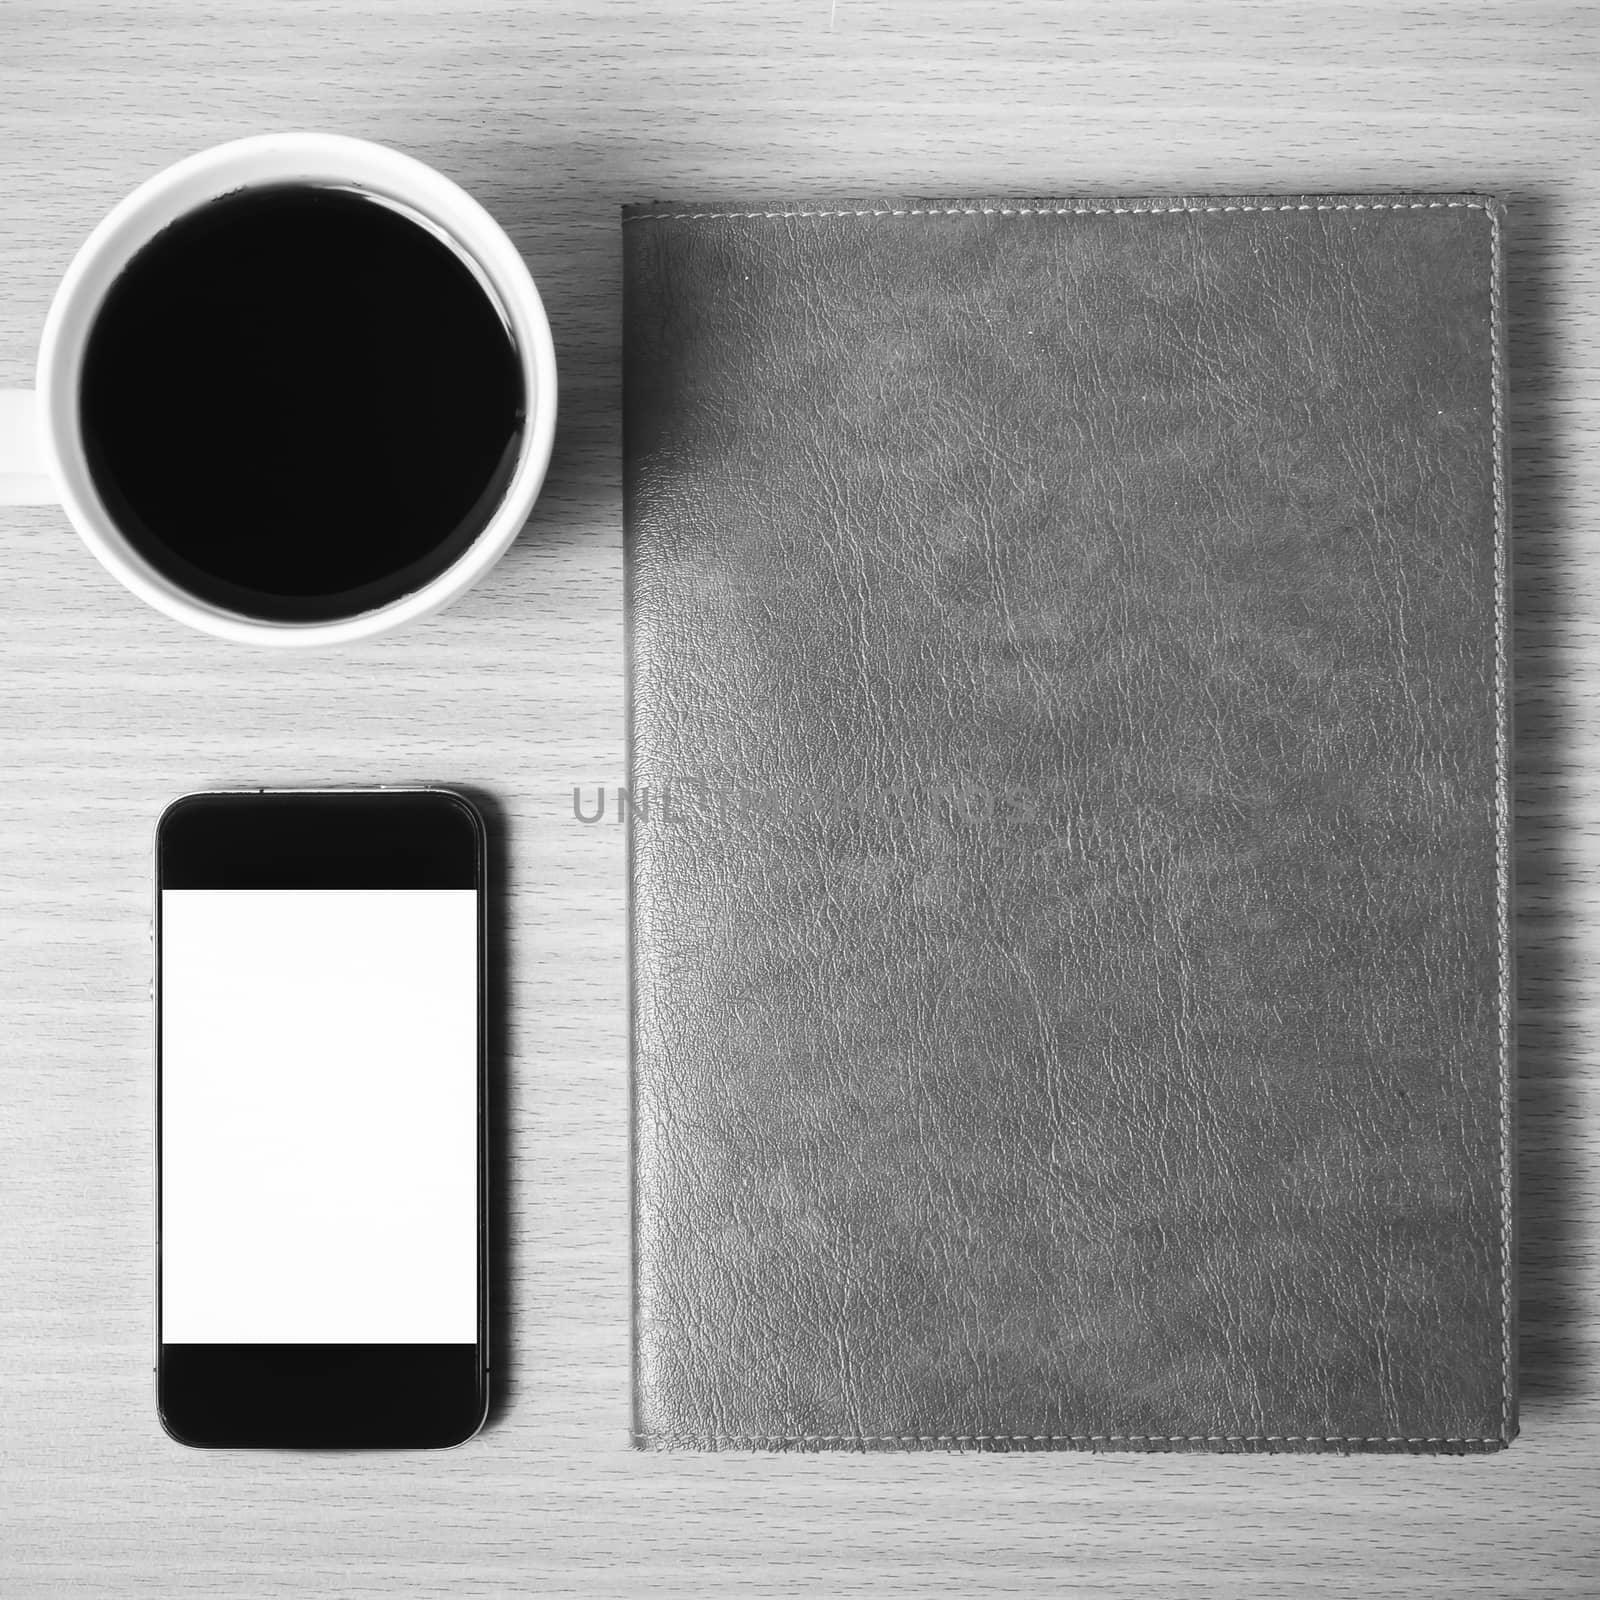 smart phone coffee cup and notebook on wood background black and white color tone style